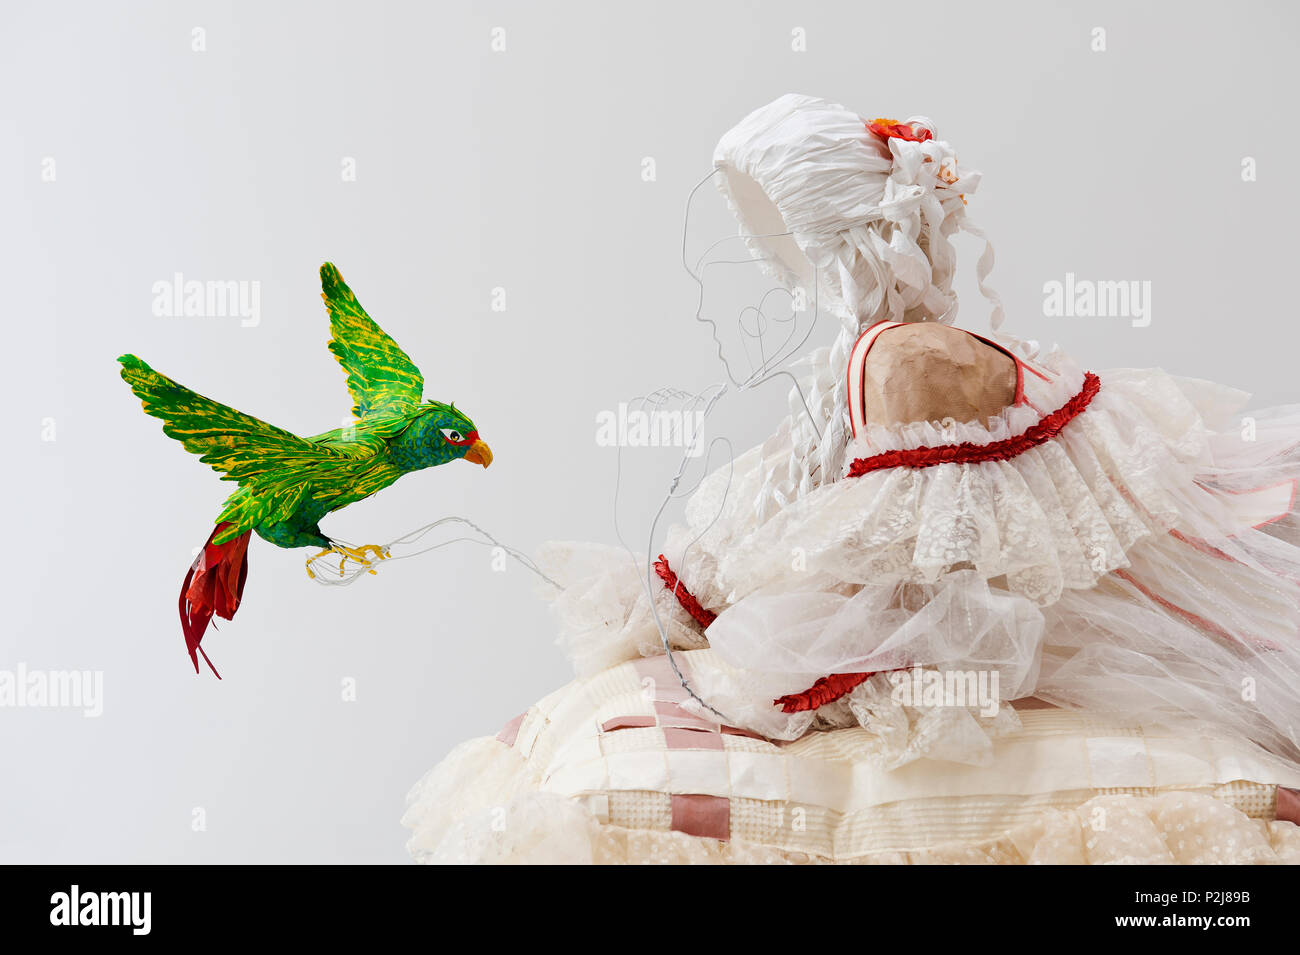 Paper parrot with mannequin wearing paper 18th century style dress Stock Photo